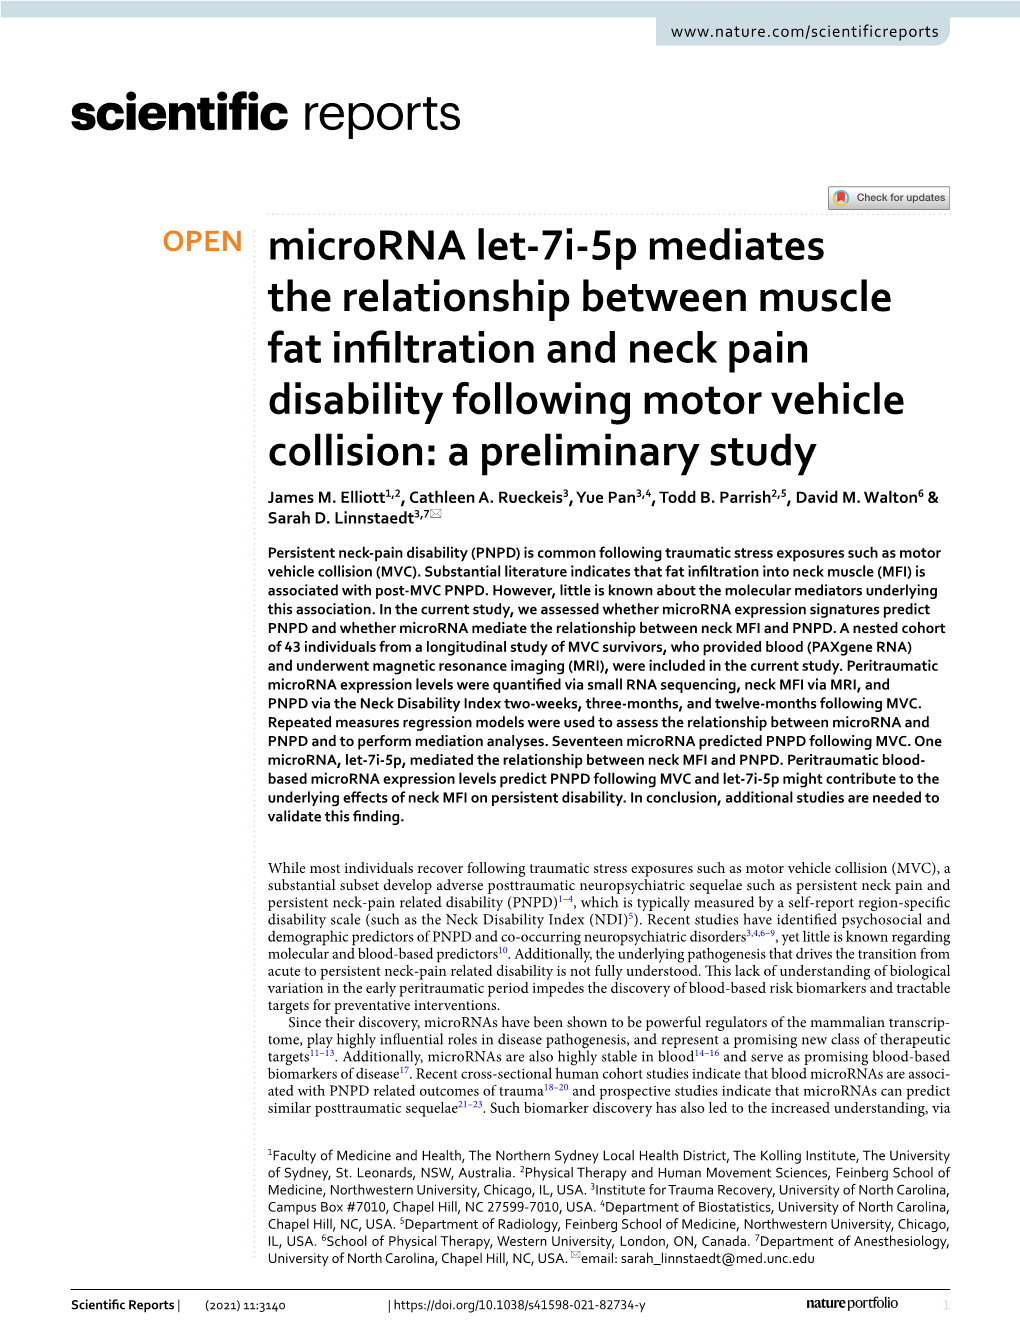 Microrna Let-7I-5P Mediates the Relationship Between Muscle Fat